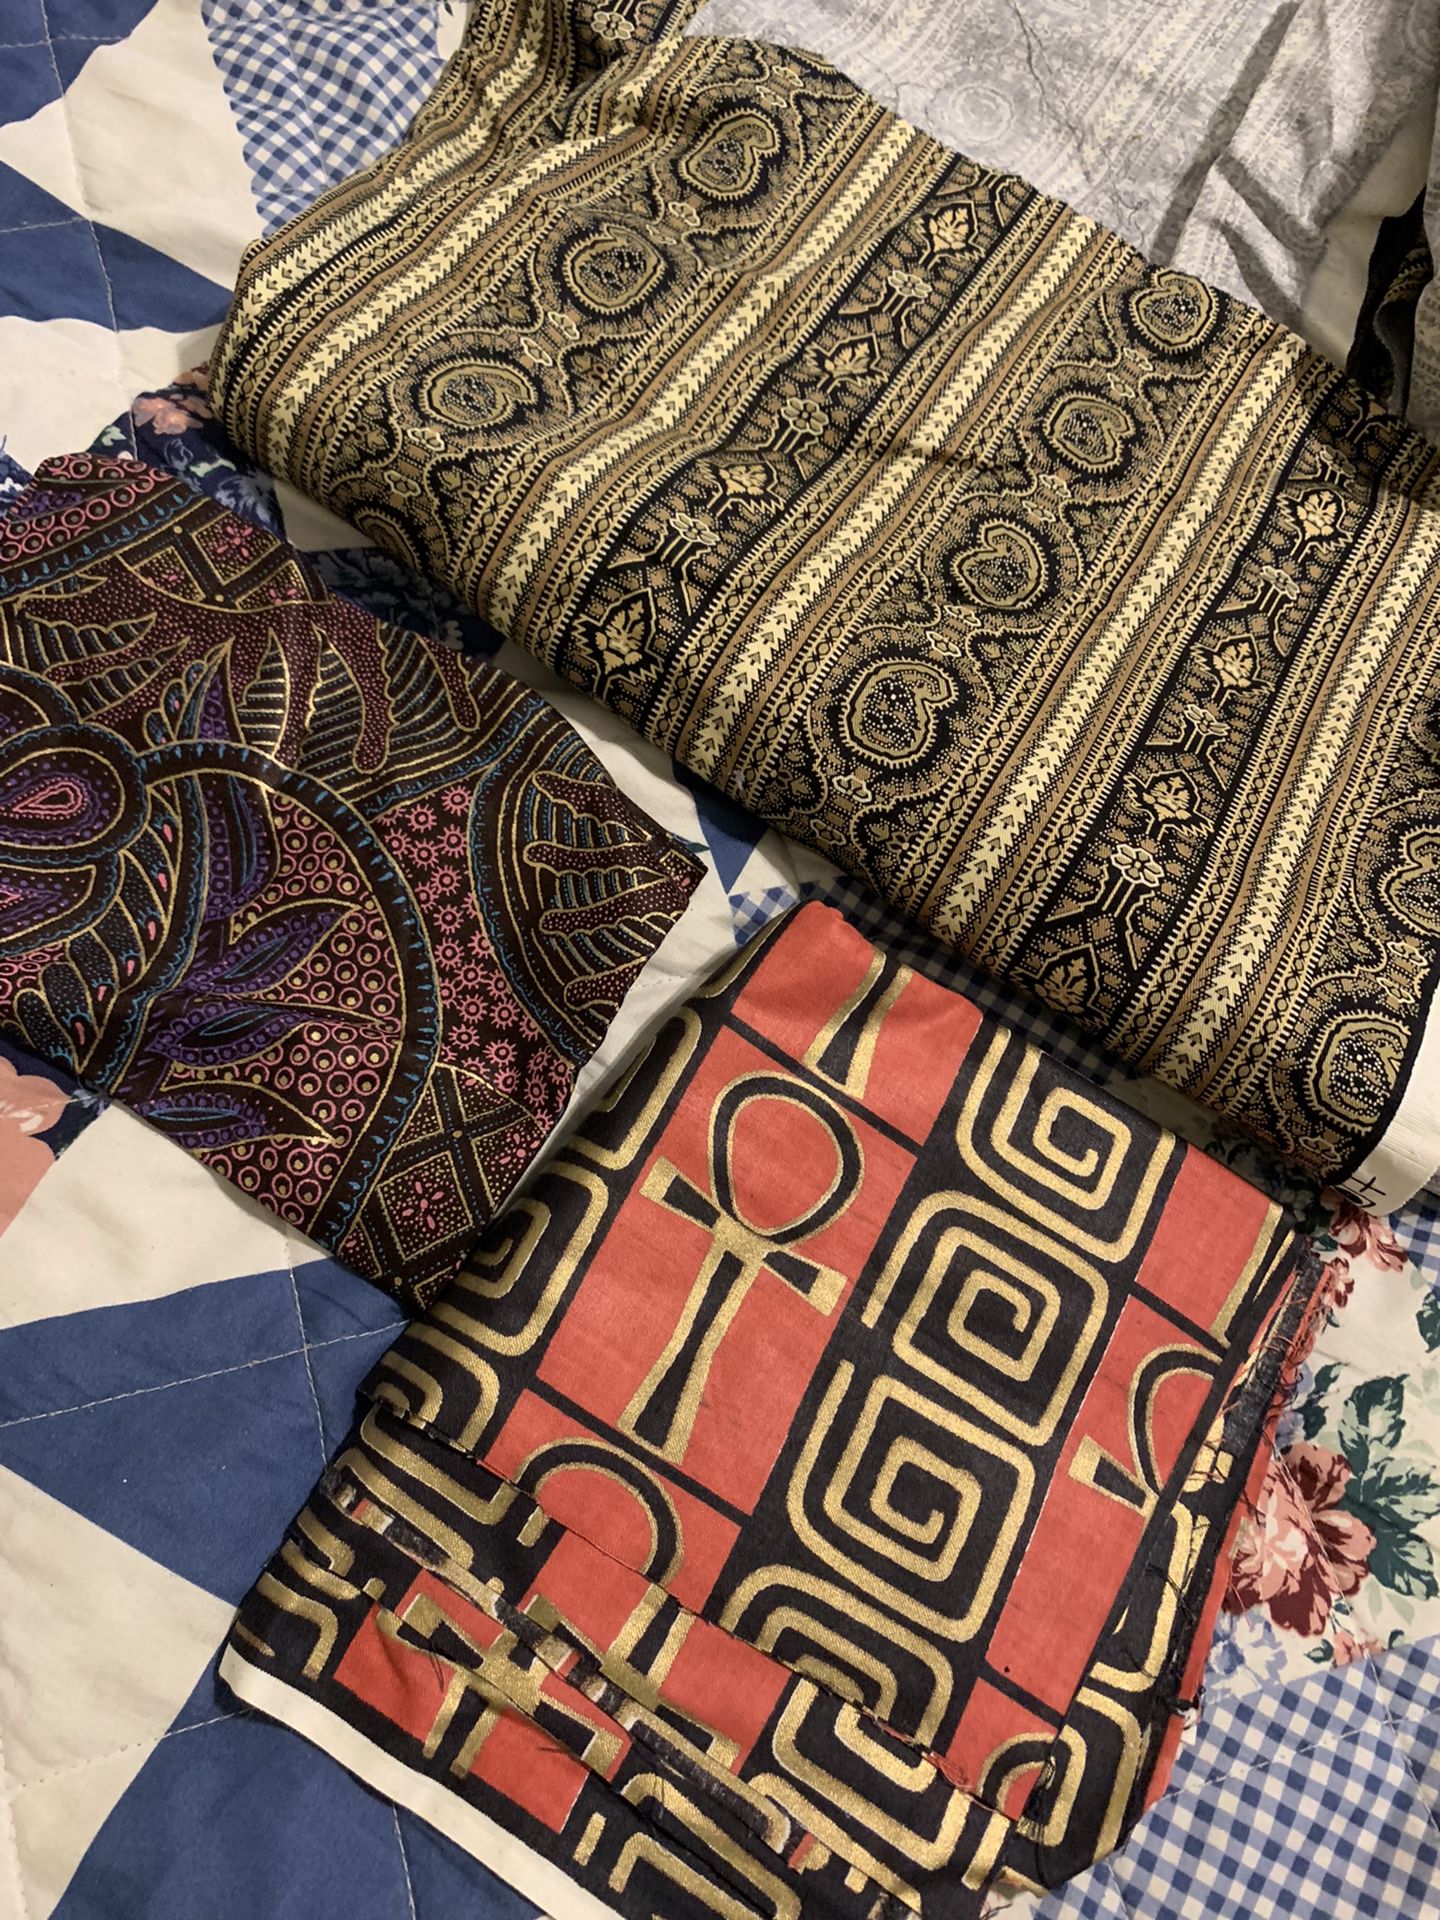 AFRICAN PRINT MATERIAL FROM NIGERIA  $6/yard 